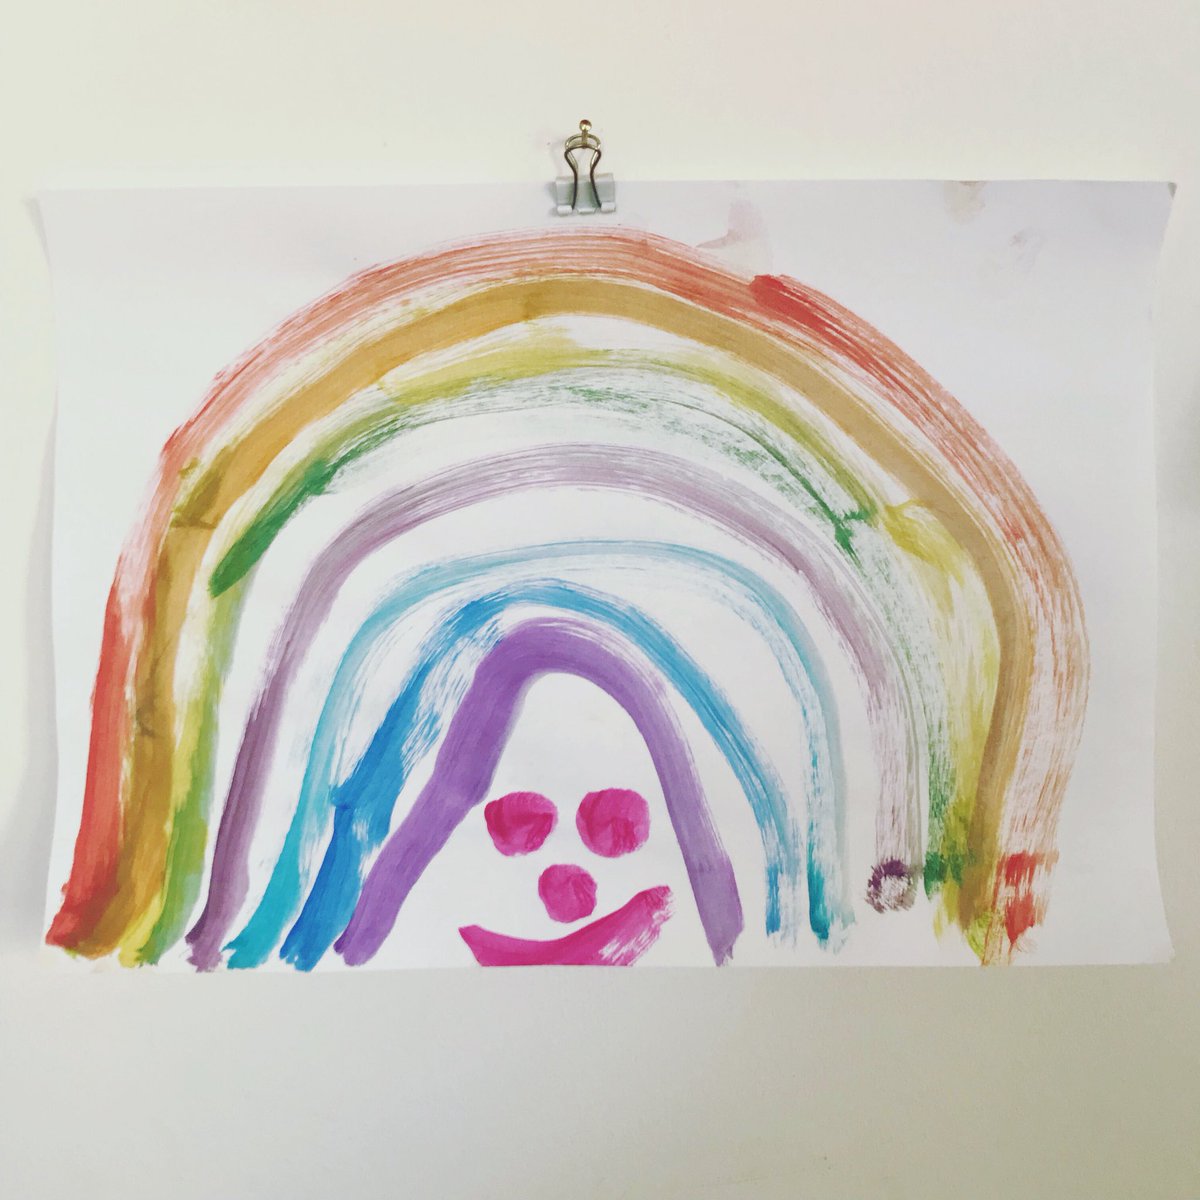 My 7 year old’s interpretation of a rainbow. I love the smiley face addition. Very on trend (especially for @buzcharlie and my new project. Can’t wait to share.) 🌈😊🤩#kindnessiscoming #brighton #hove #hoveactually #newbrand #brandlaunch #brandnewlaunch